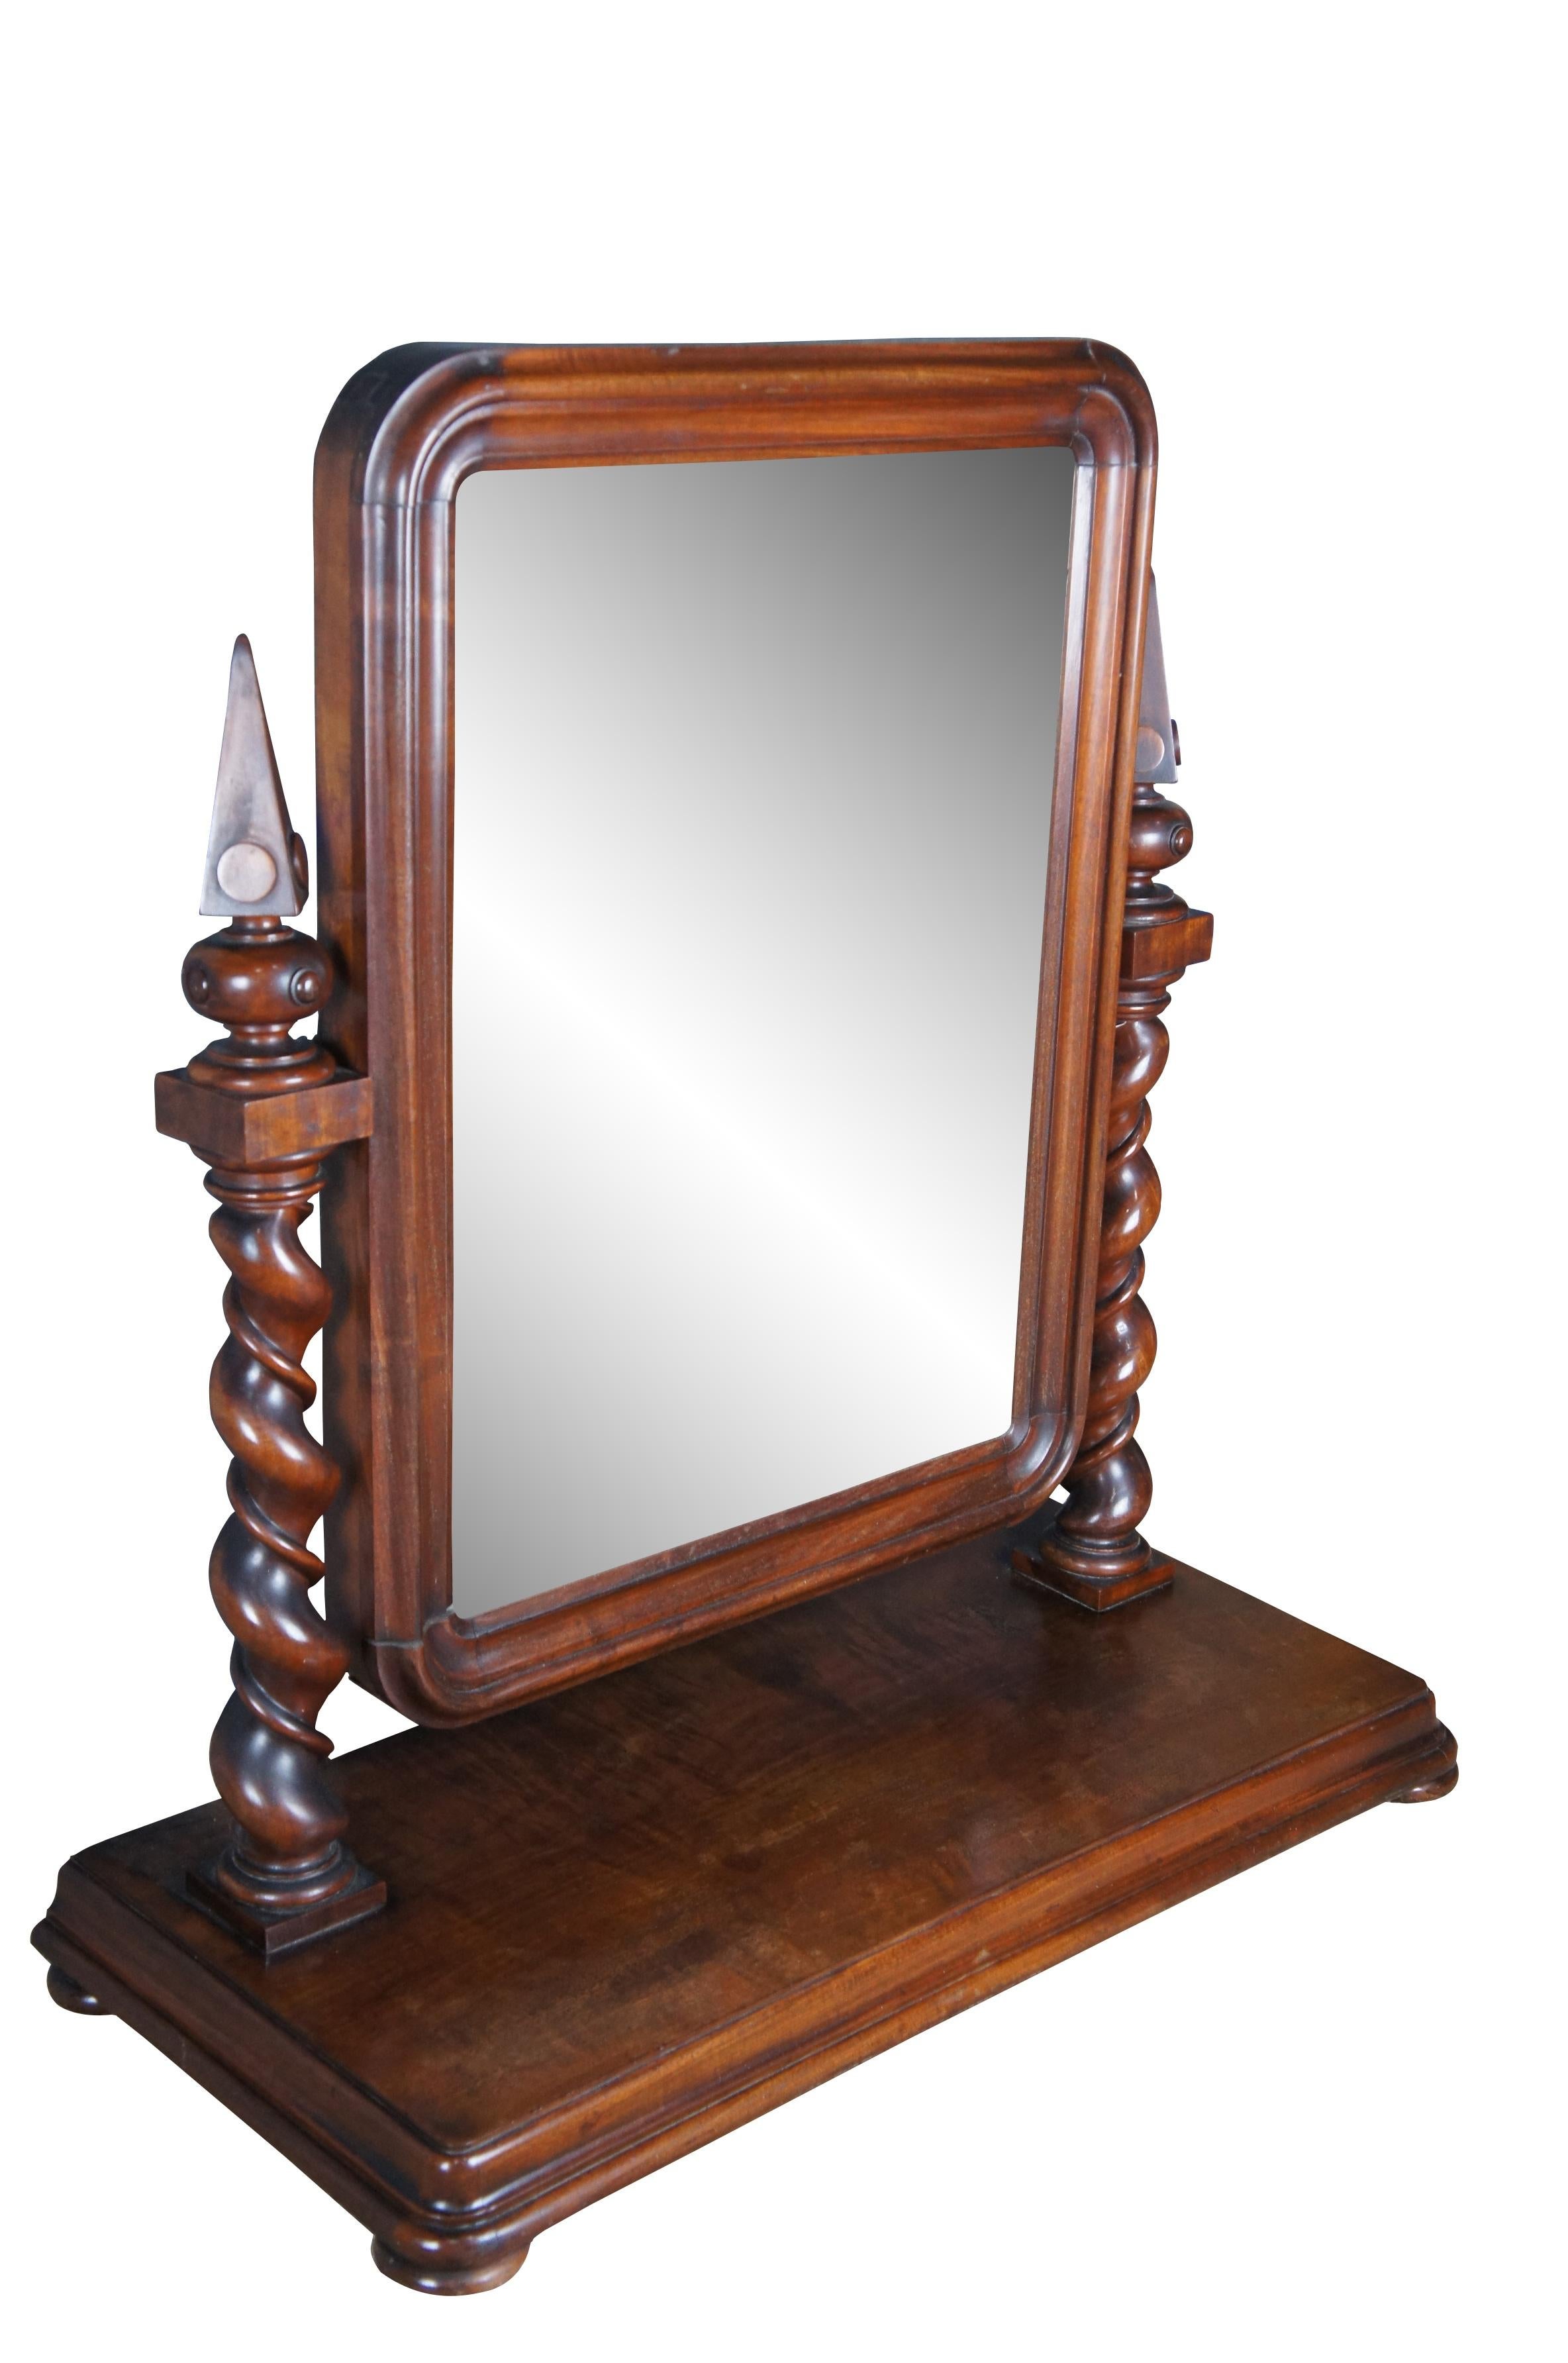 Impressive antique 19th century (circa 1880s) English Empire gentleman's dressing mirror. Made from mahogany with a beveled wooden frame supported by exceptional barley twist uprights with pyramid shaped finials. The rectangular base is raised over